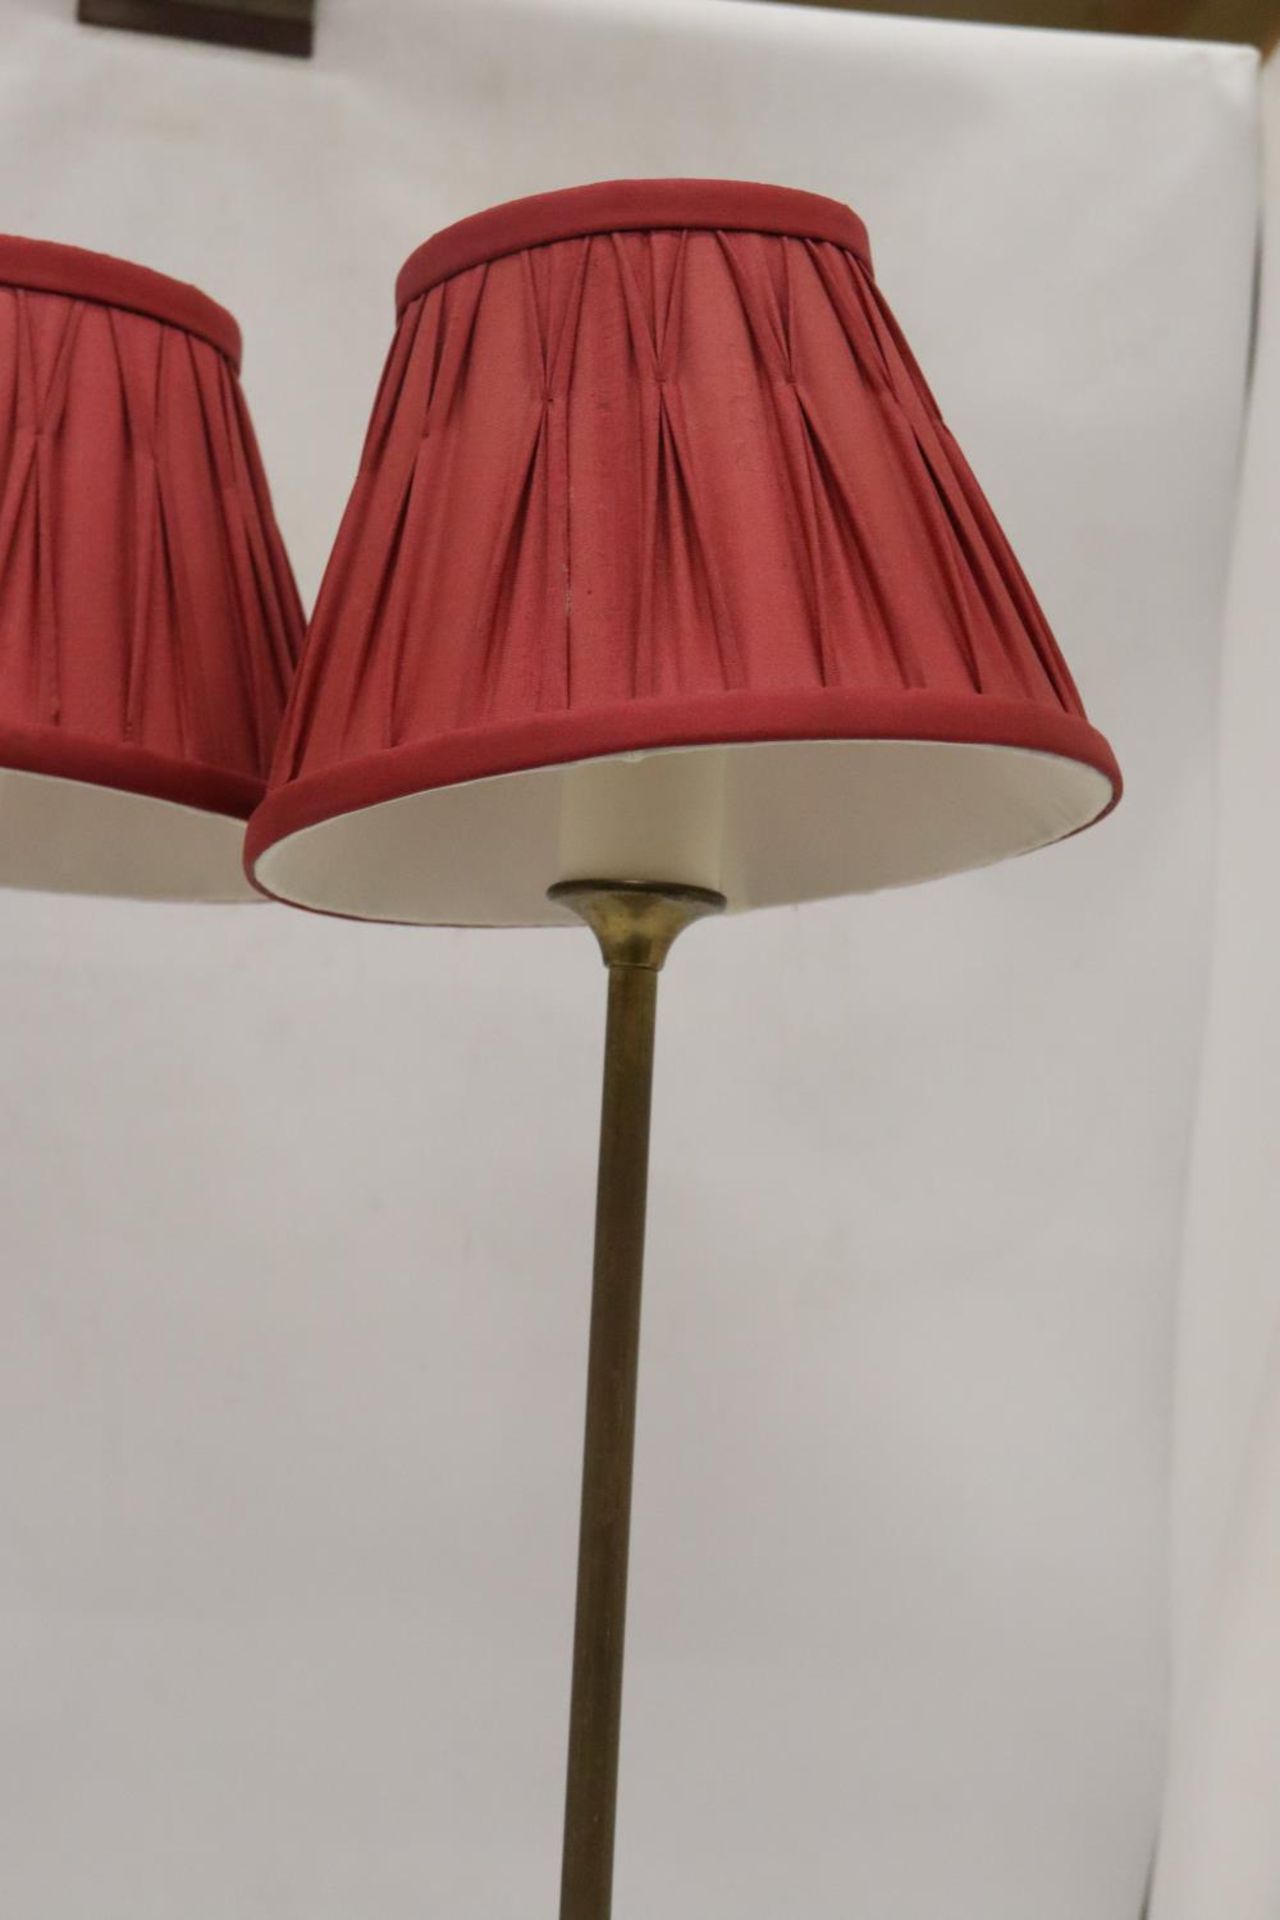 A PAIR OF LAMPS WITH PLEATED SHADES AND BRASS STANDS - Image 3 of 6